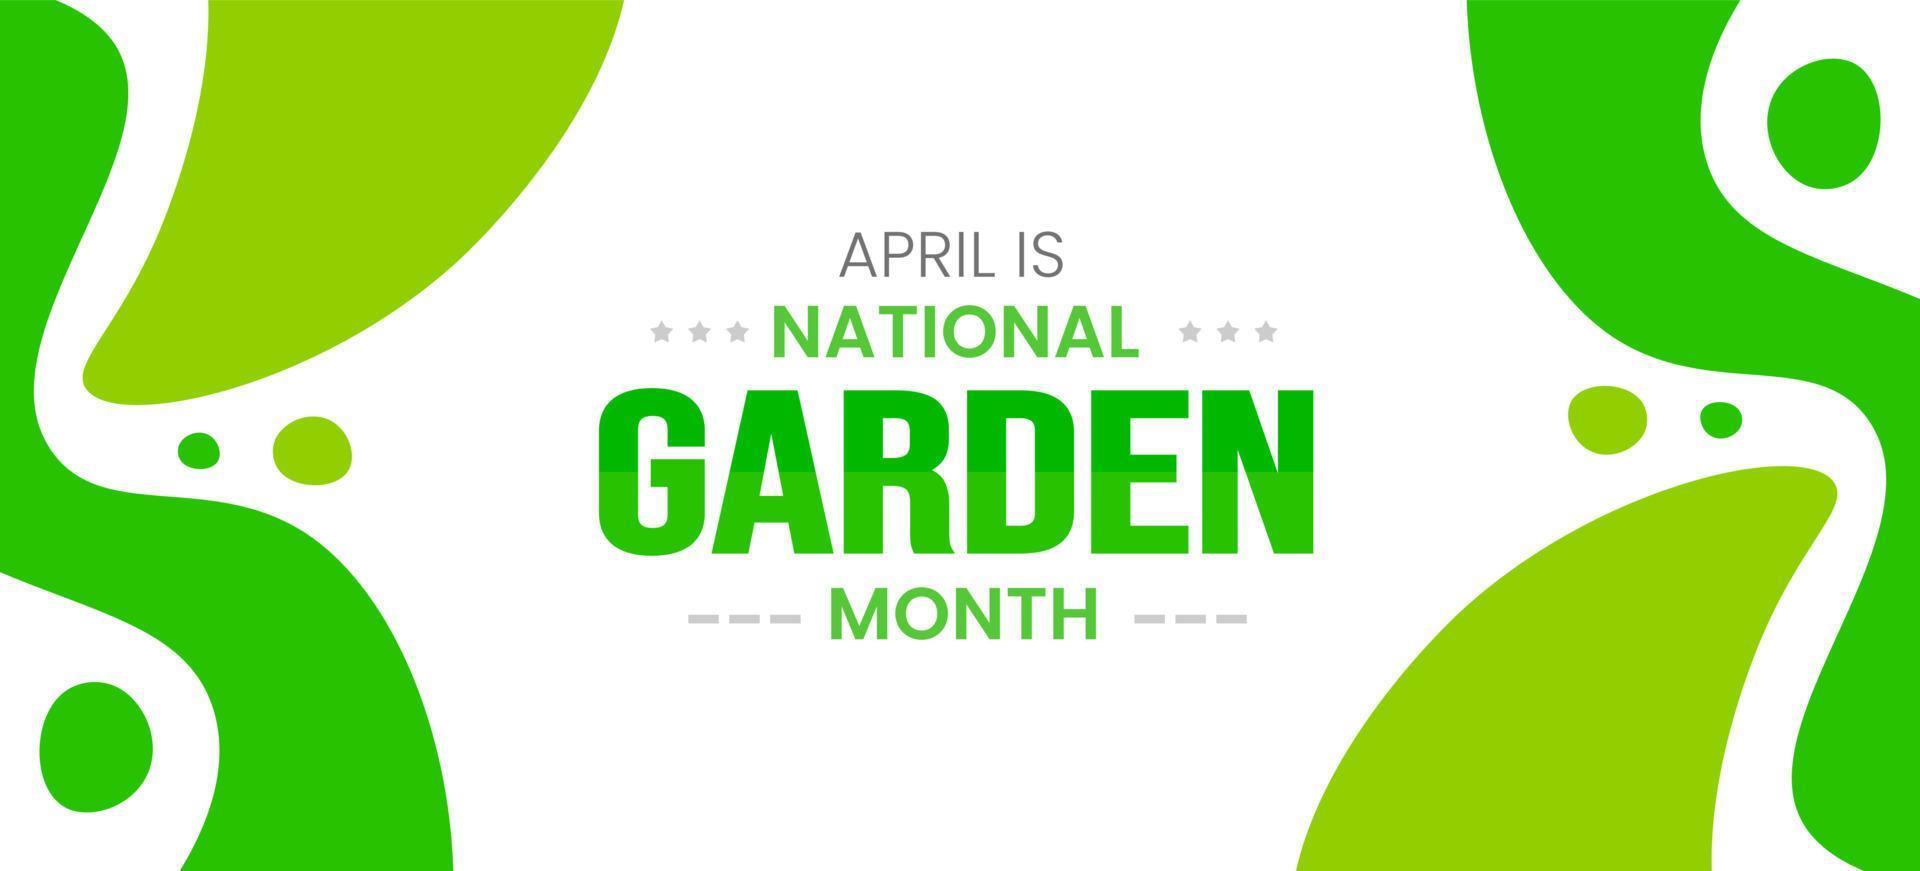 National Garden Month background or banner design template celebrated in April. vector